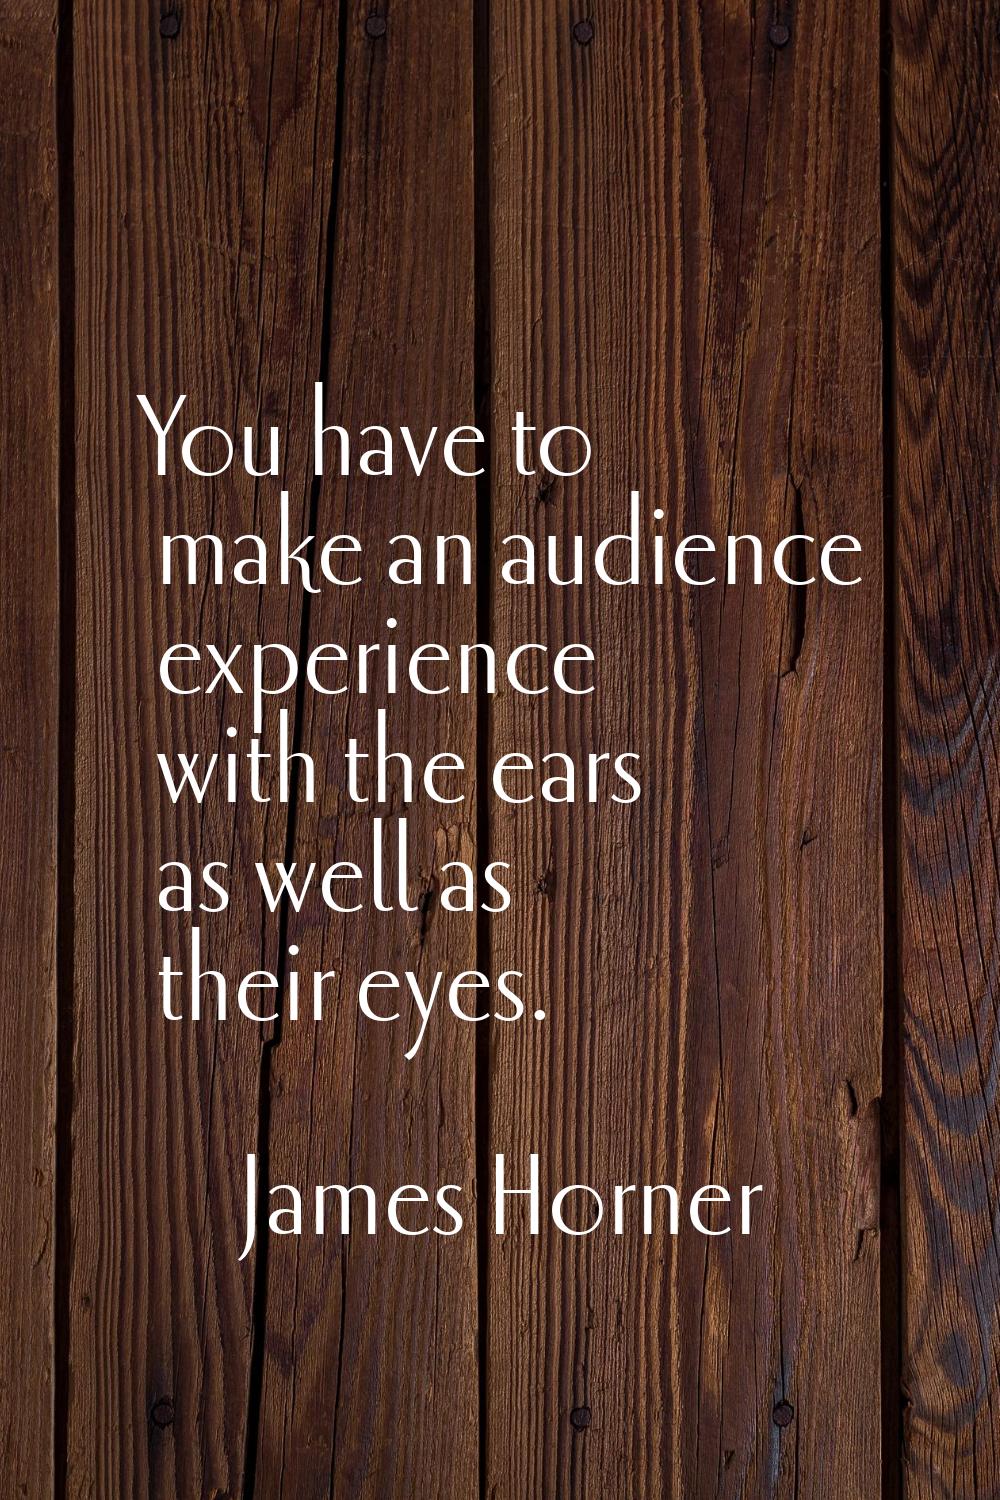 You have to make an audience experience with the ears as well as their eyes.